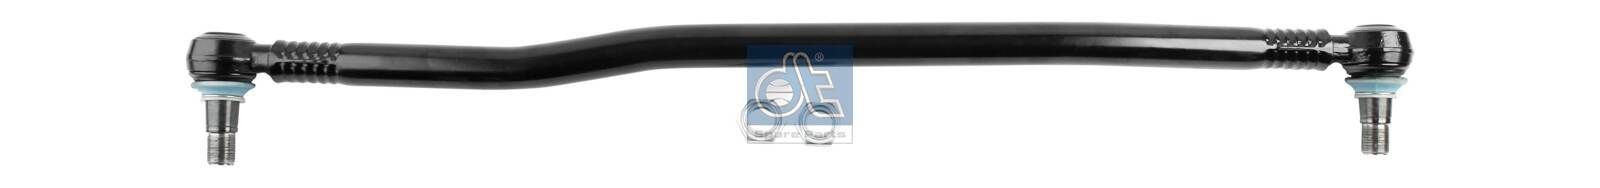 DT Spare Parts 4.65326 Centre Rod Assembly cheap in online store